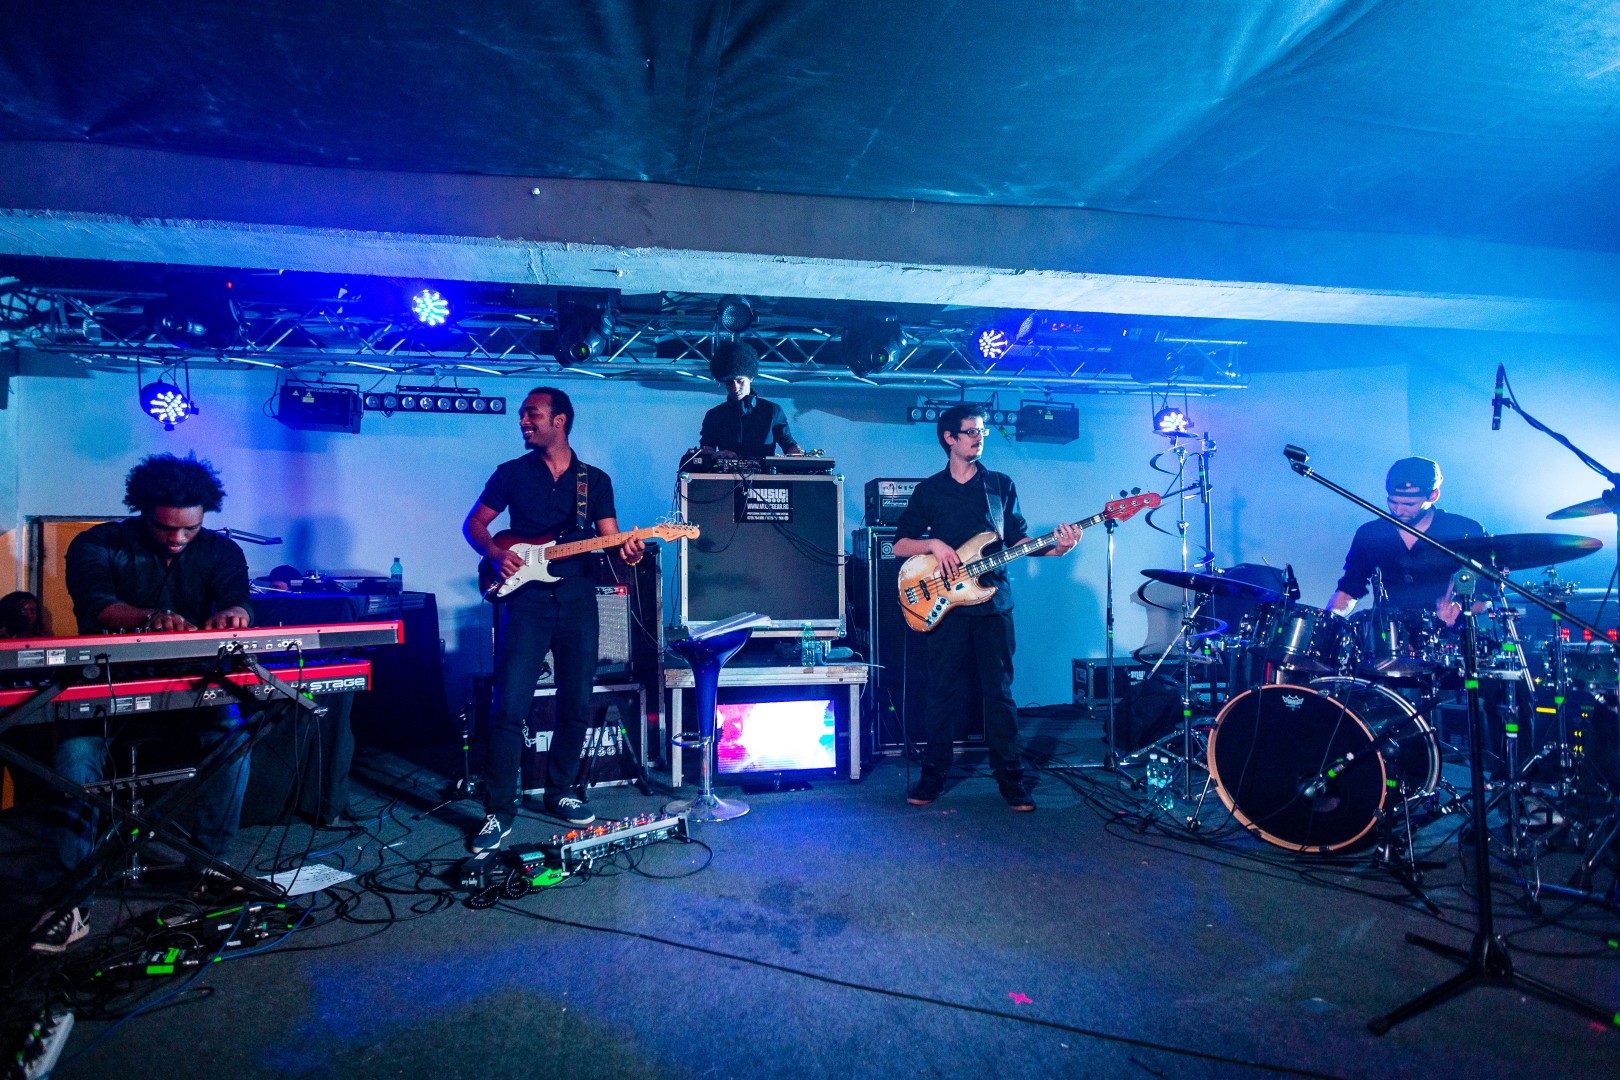 Digflo Band at Atelierul de Producție in Bucharest on March 29, 2014 (bcea02e680)